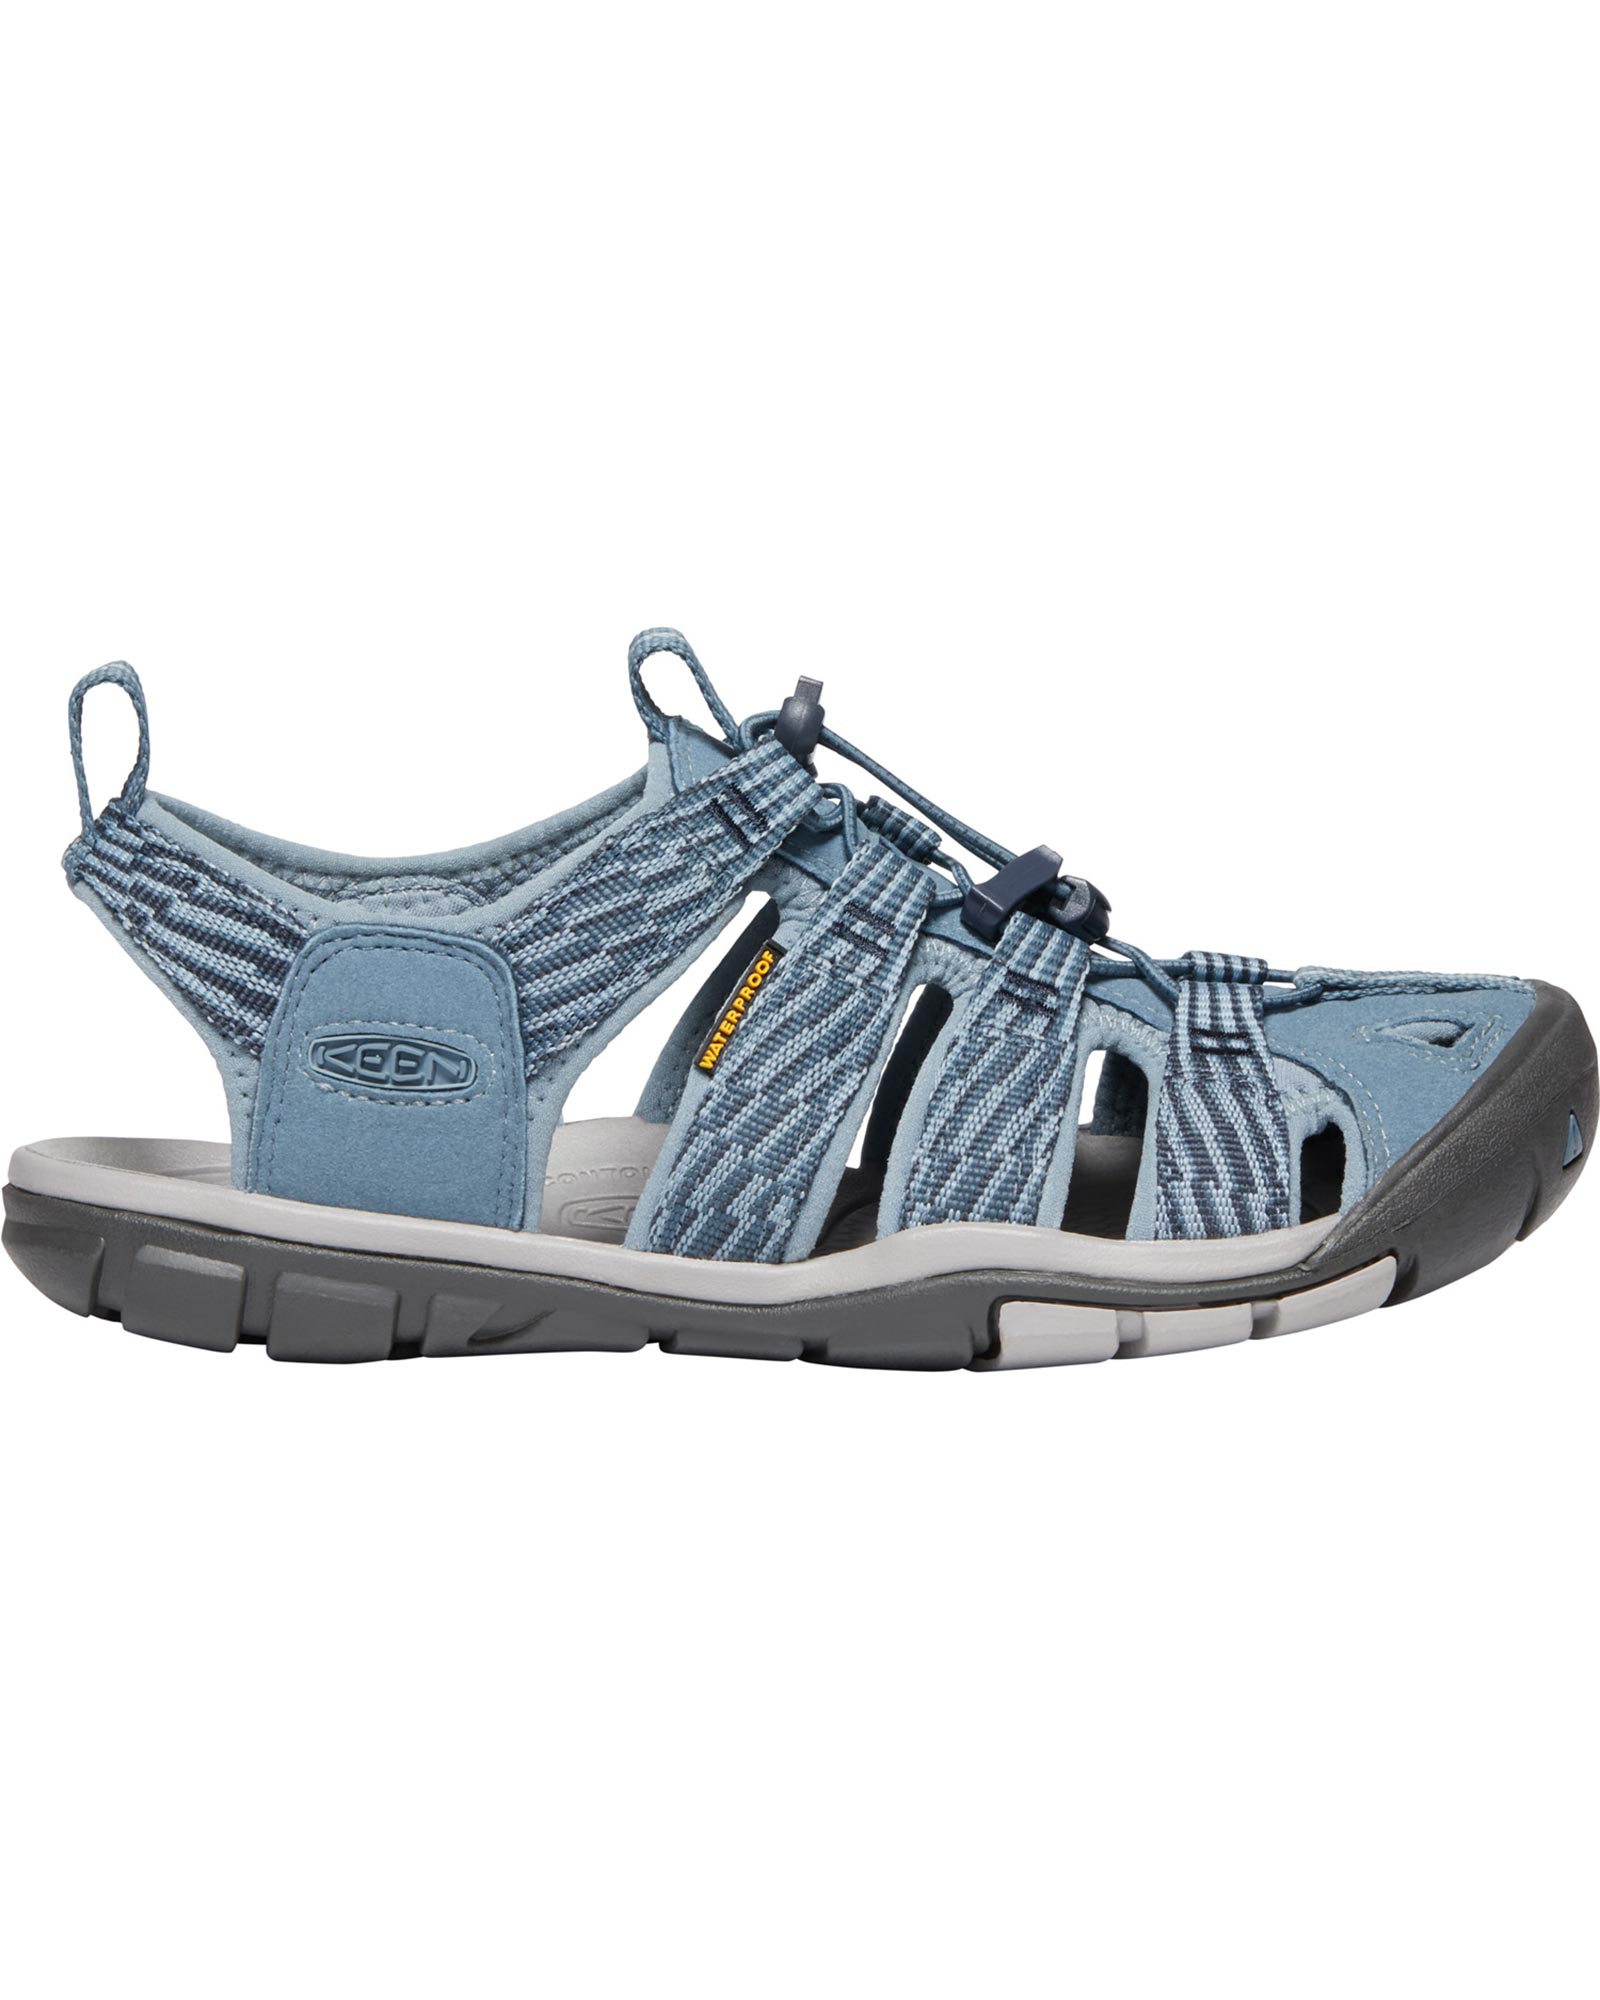 Product image of Keen Clearwater CNX Women's Sandals